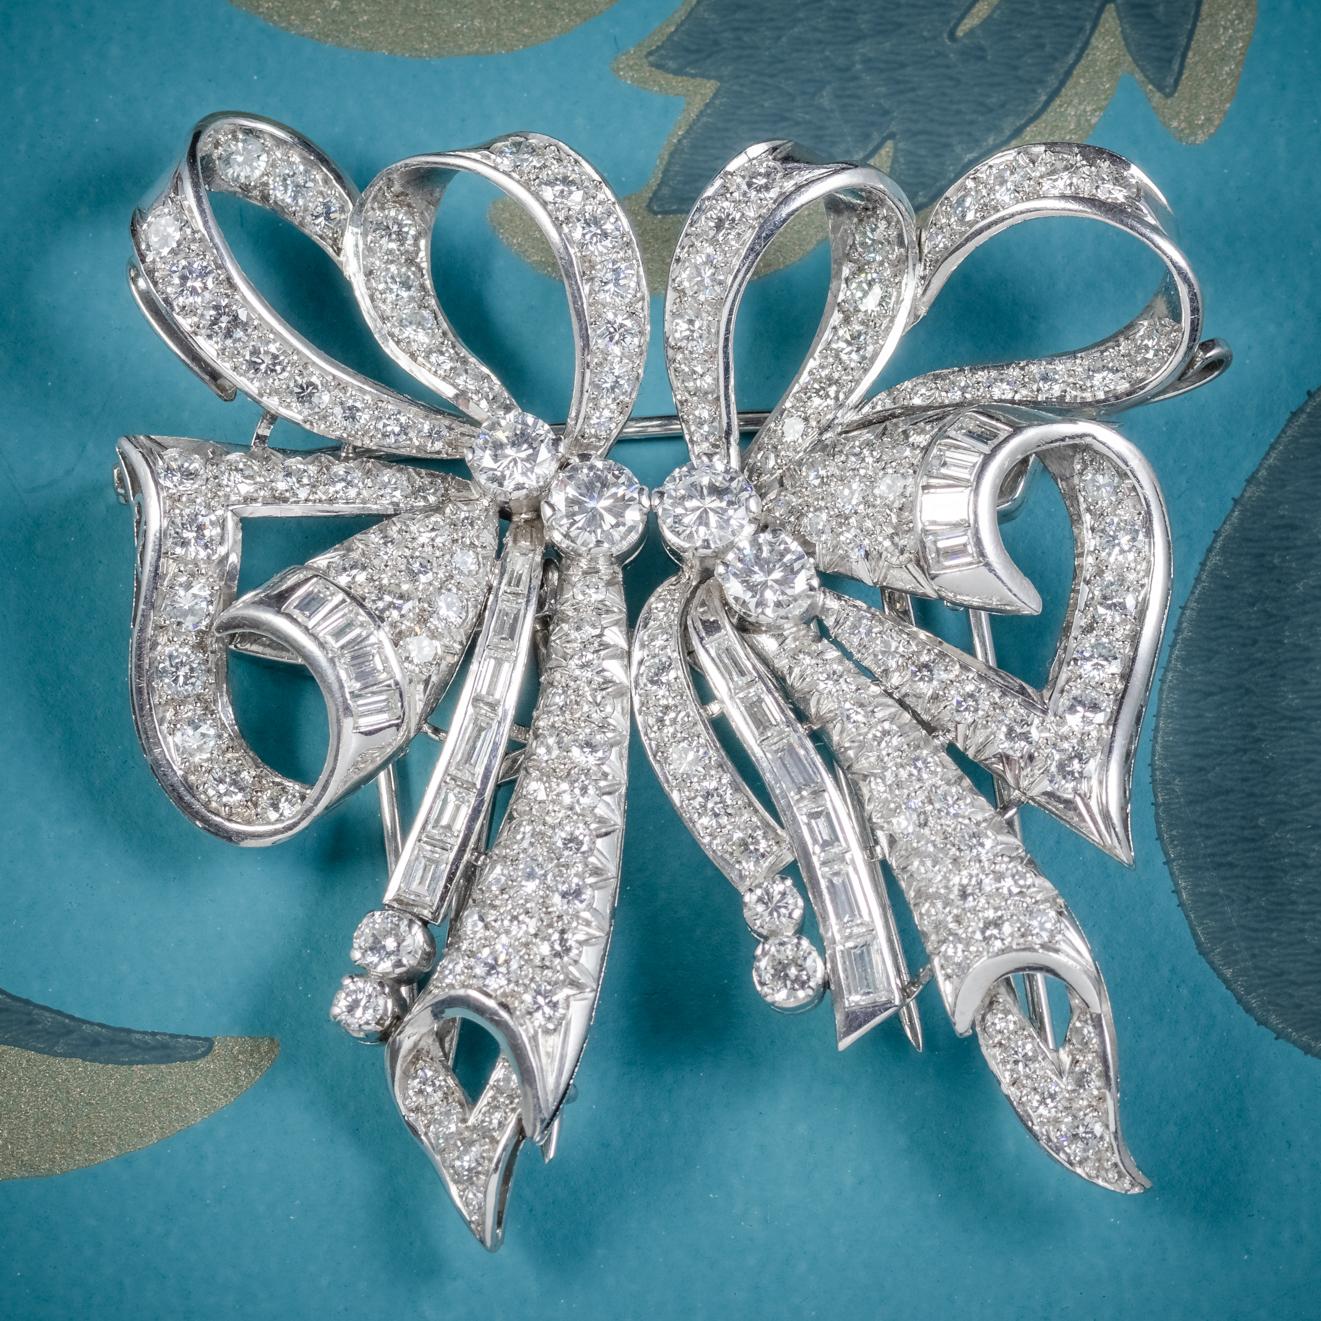 This magnificent antique French double clip brooch was made during the Edwardian era, Circa 1915.

Set with approx. 15ct of old cut, brilliant cut and Emerald cut Diamonds in a fabulous abstract all Platinum gallery.

The larger central Diamonds are